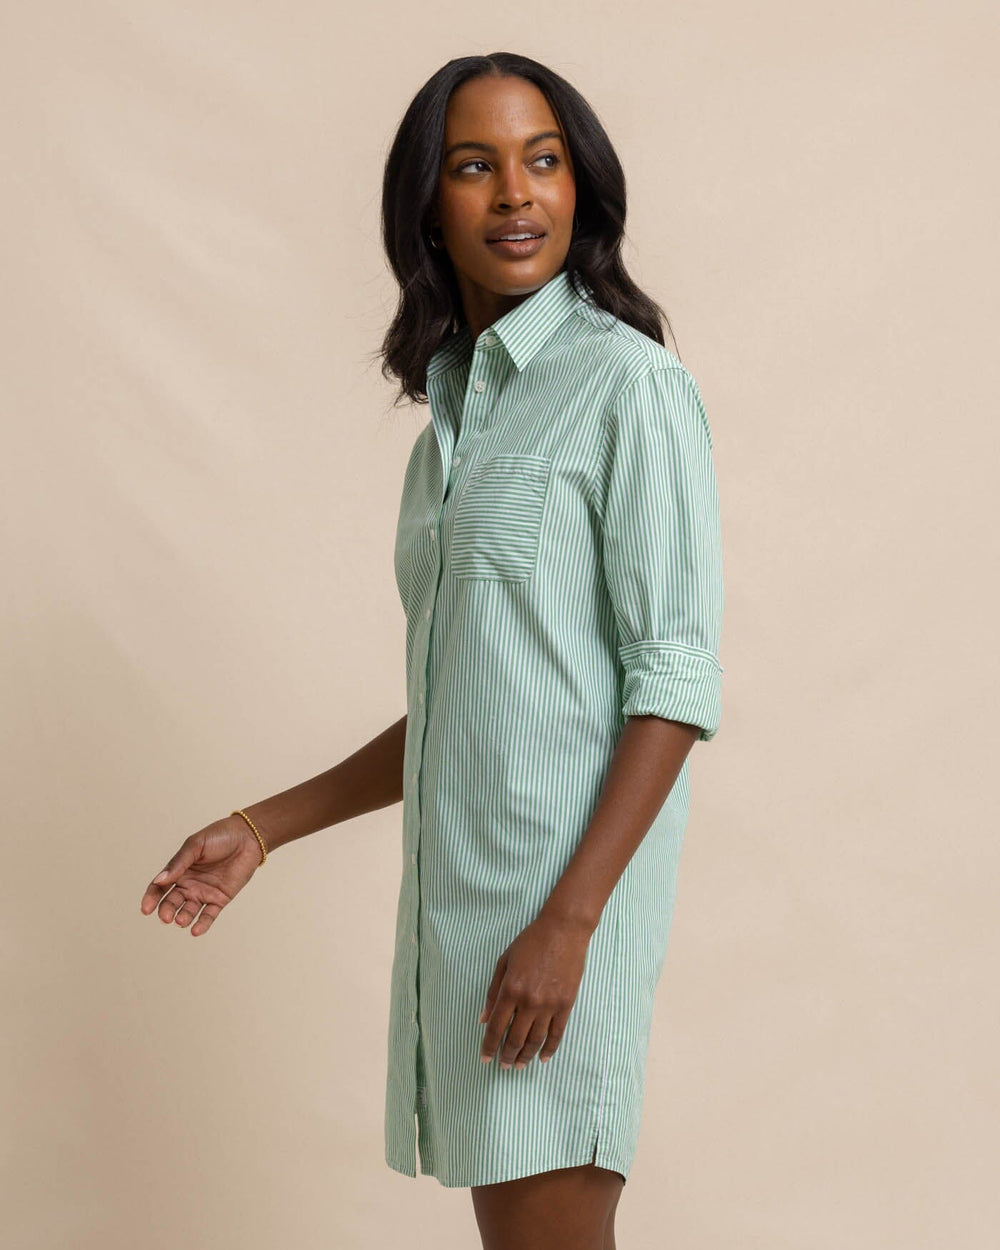 The front view of the Southern Tide Cam Stripe Poplin Dress by Southern Tide - Lawn Green